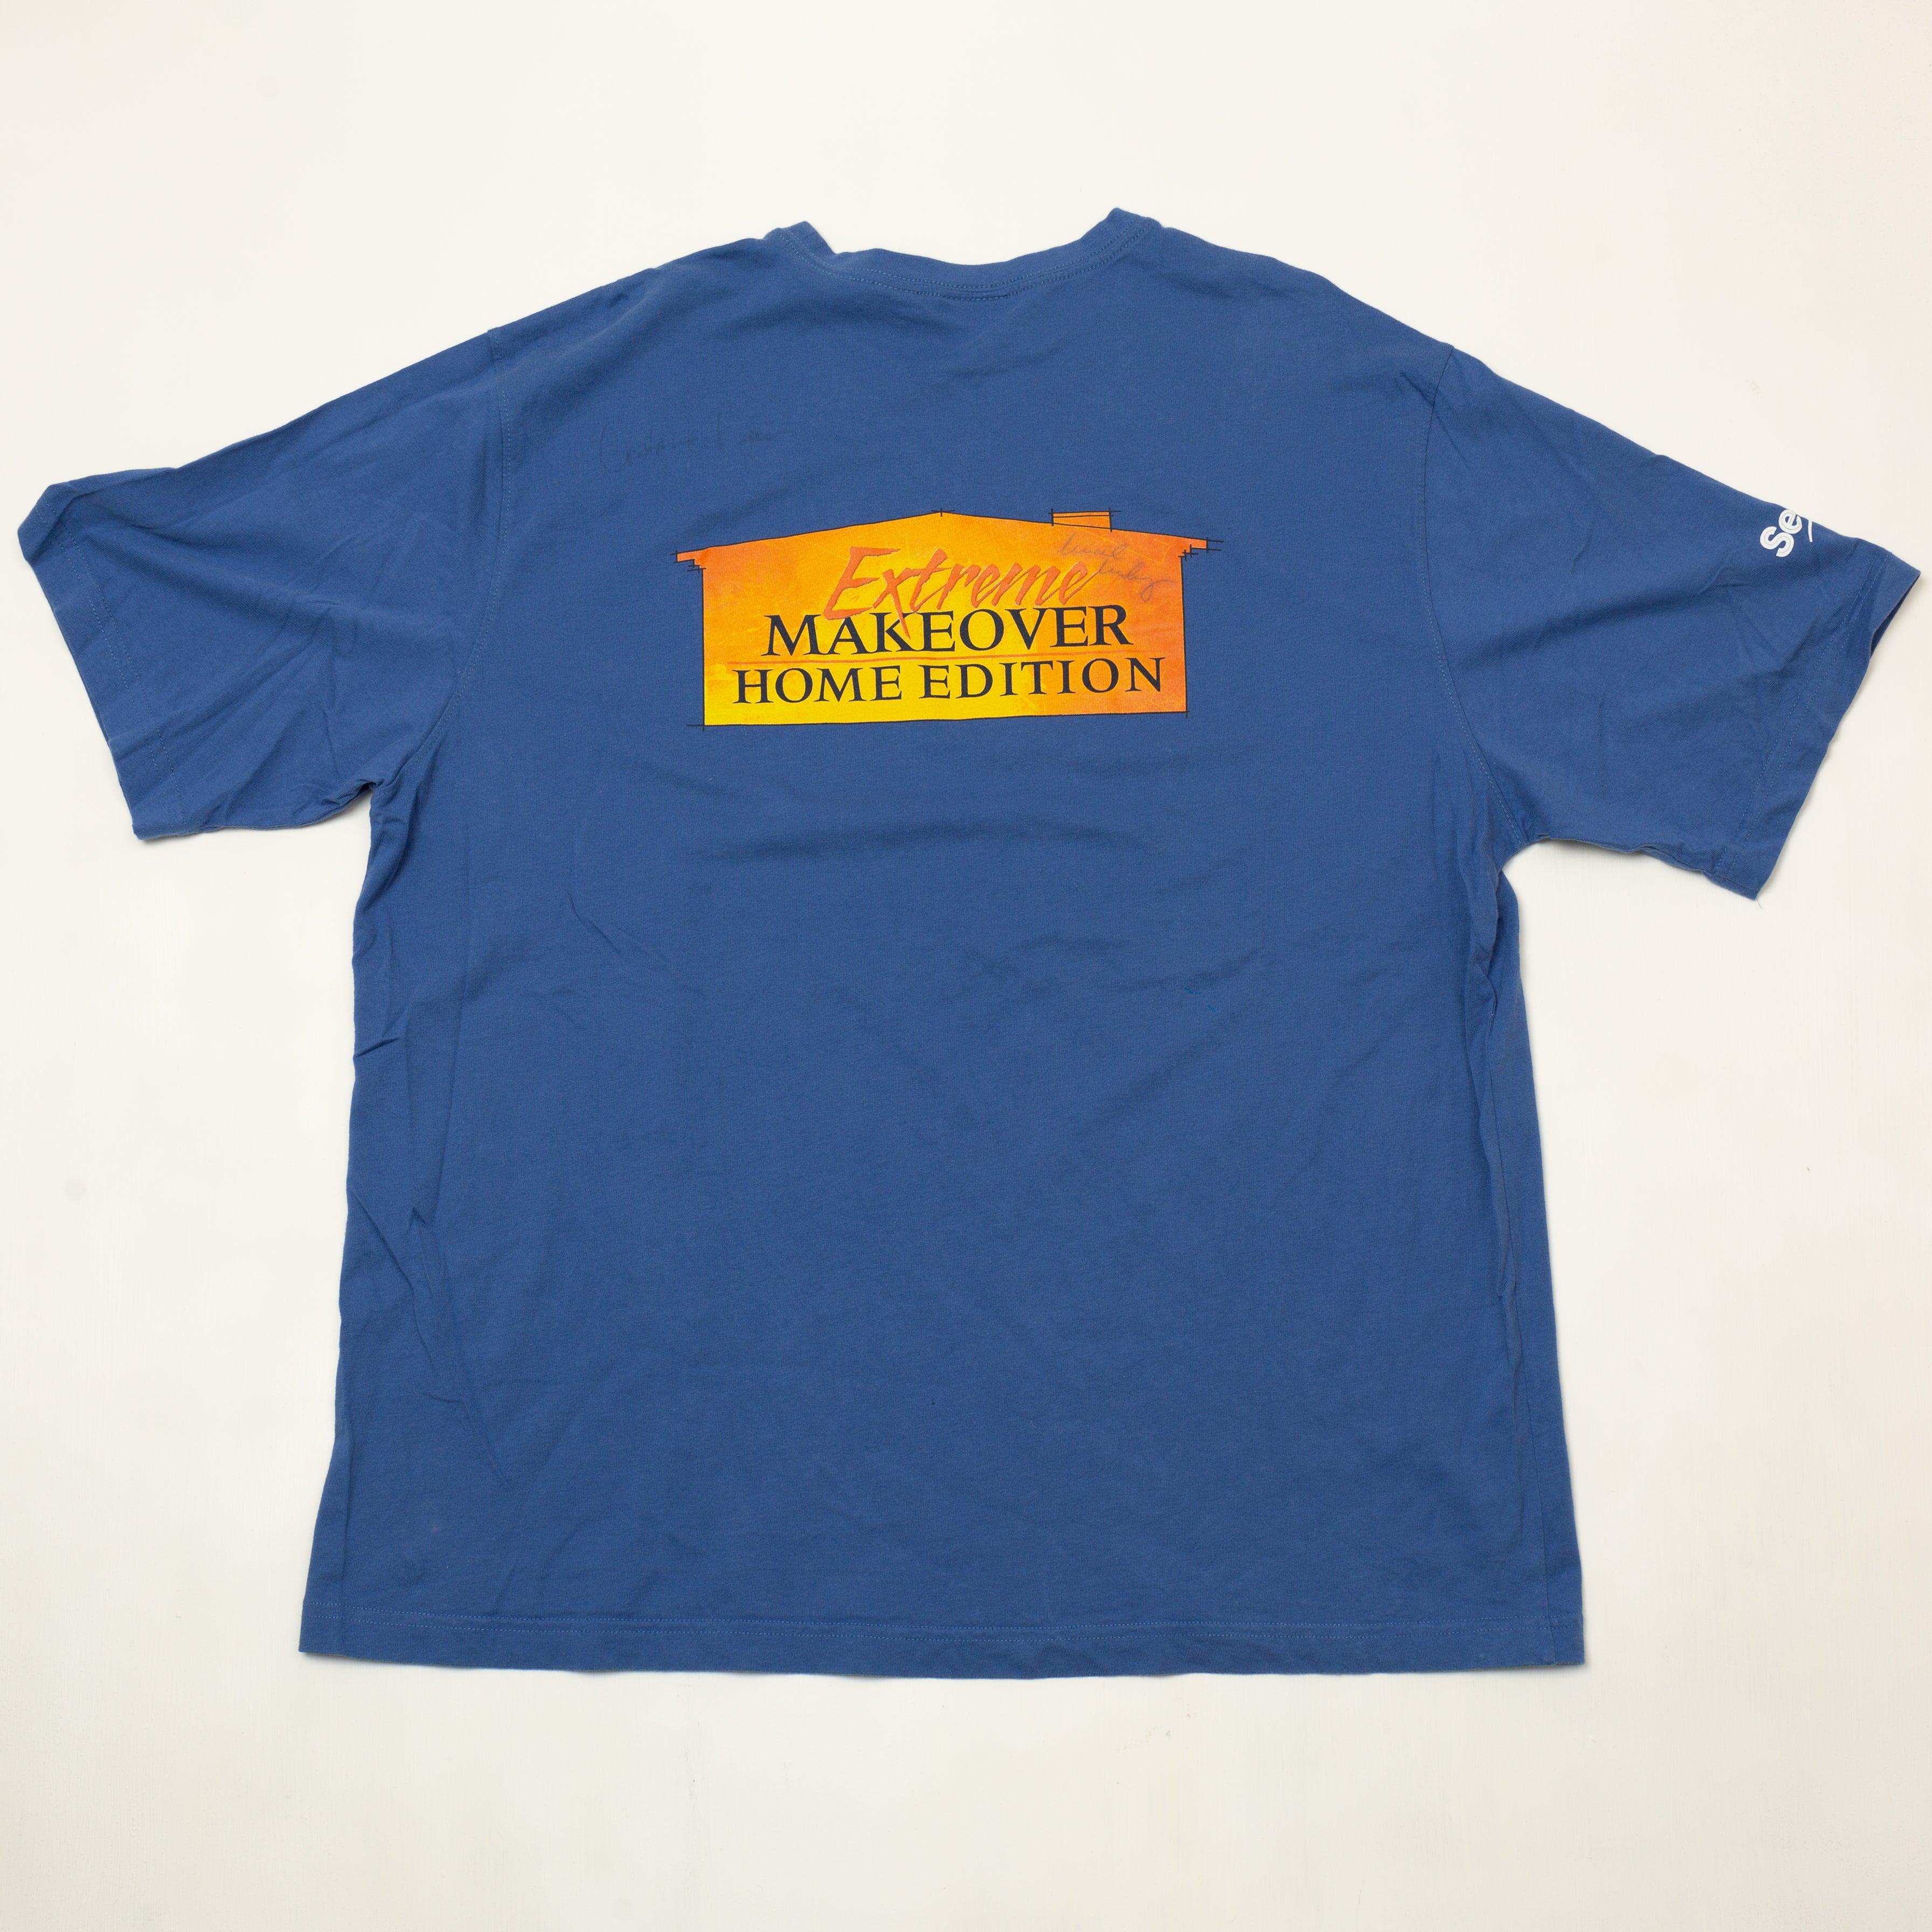 Y2K Extreme Makeover Home Edition Sears T-Shirt Size XL